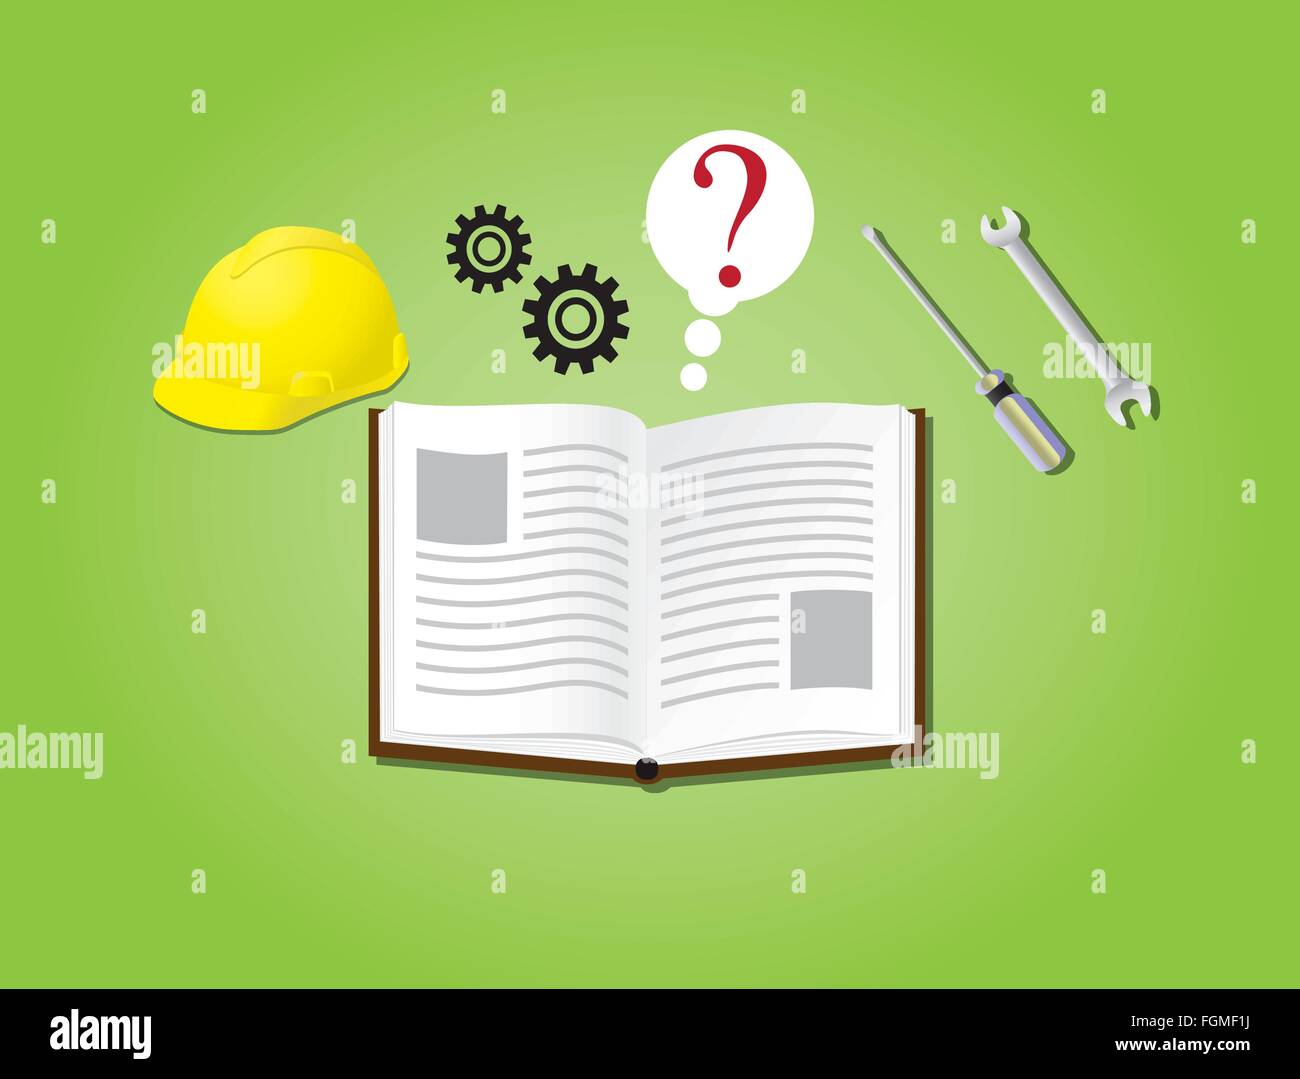 manual instruction book with books gear helmet helm secure Stock Vector